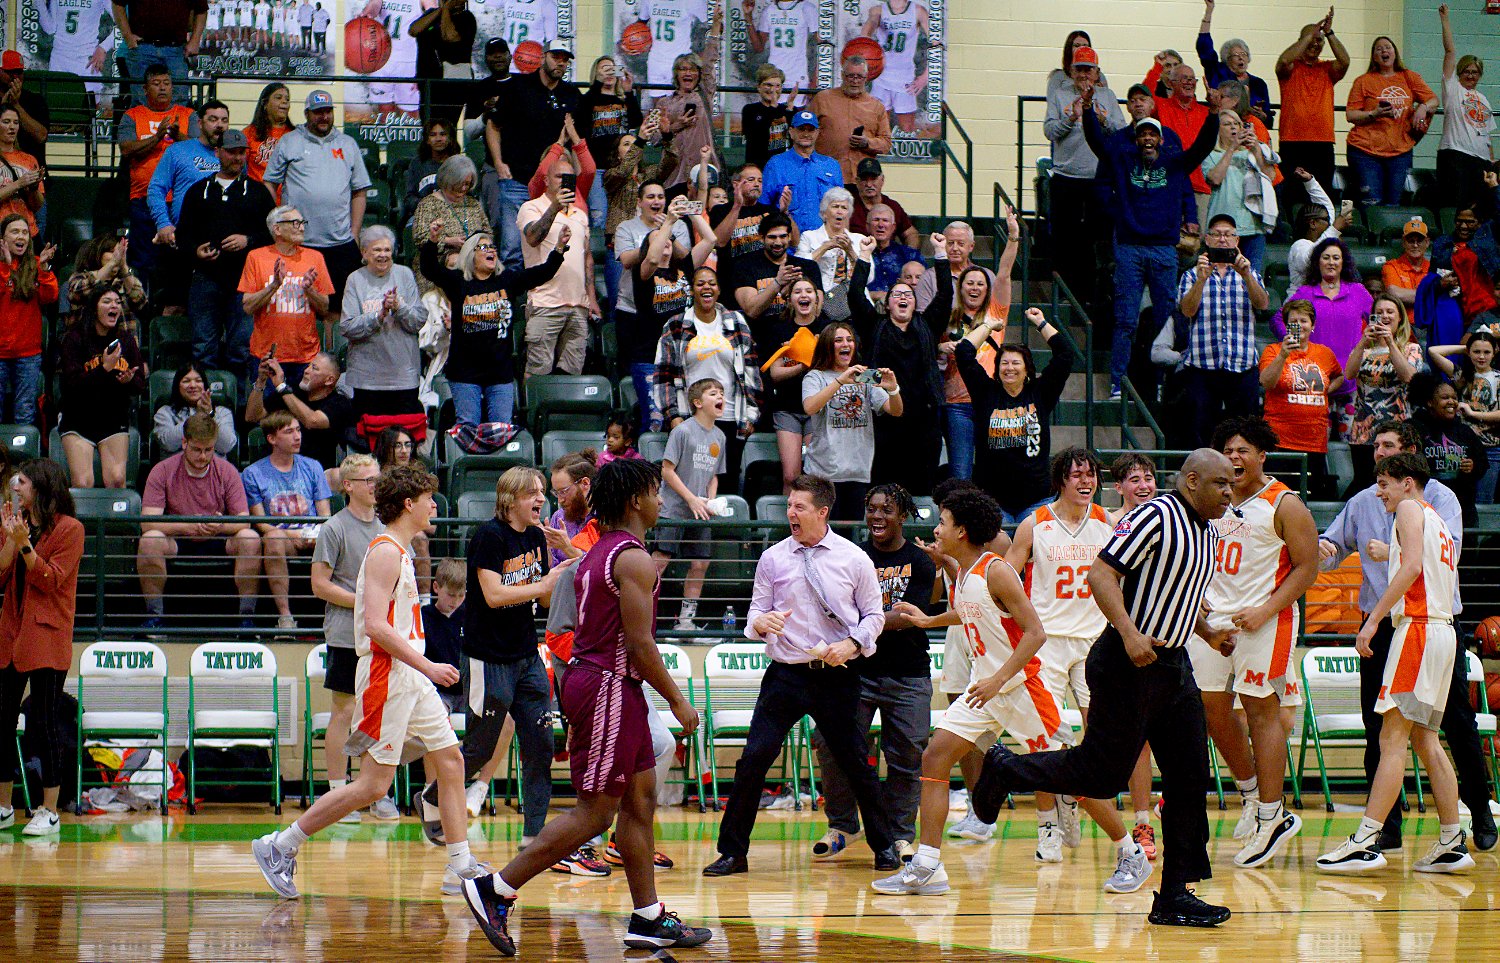 Mineola reacts to winning their regional quarterfinal matchup Tuesday against Atlanta in Tatum. [see more shots, buy basketball photos]